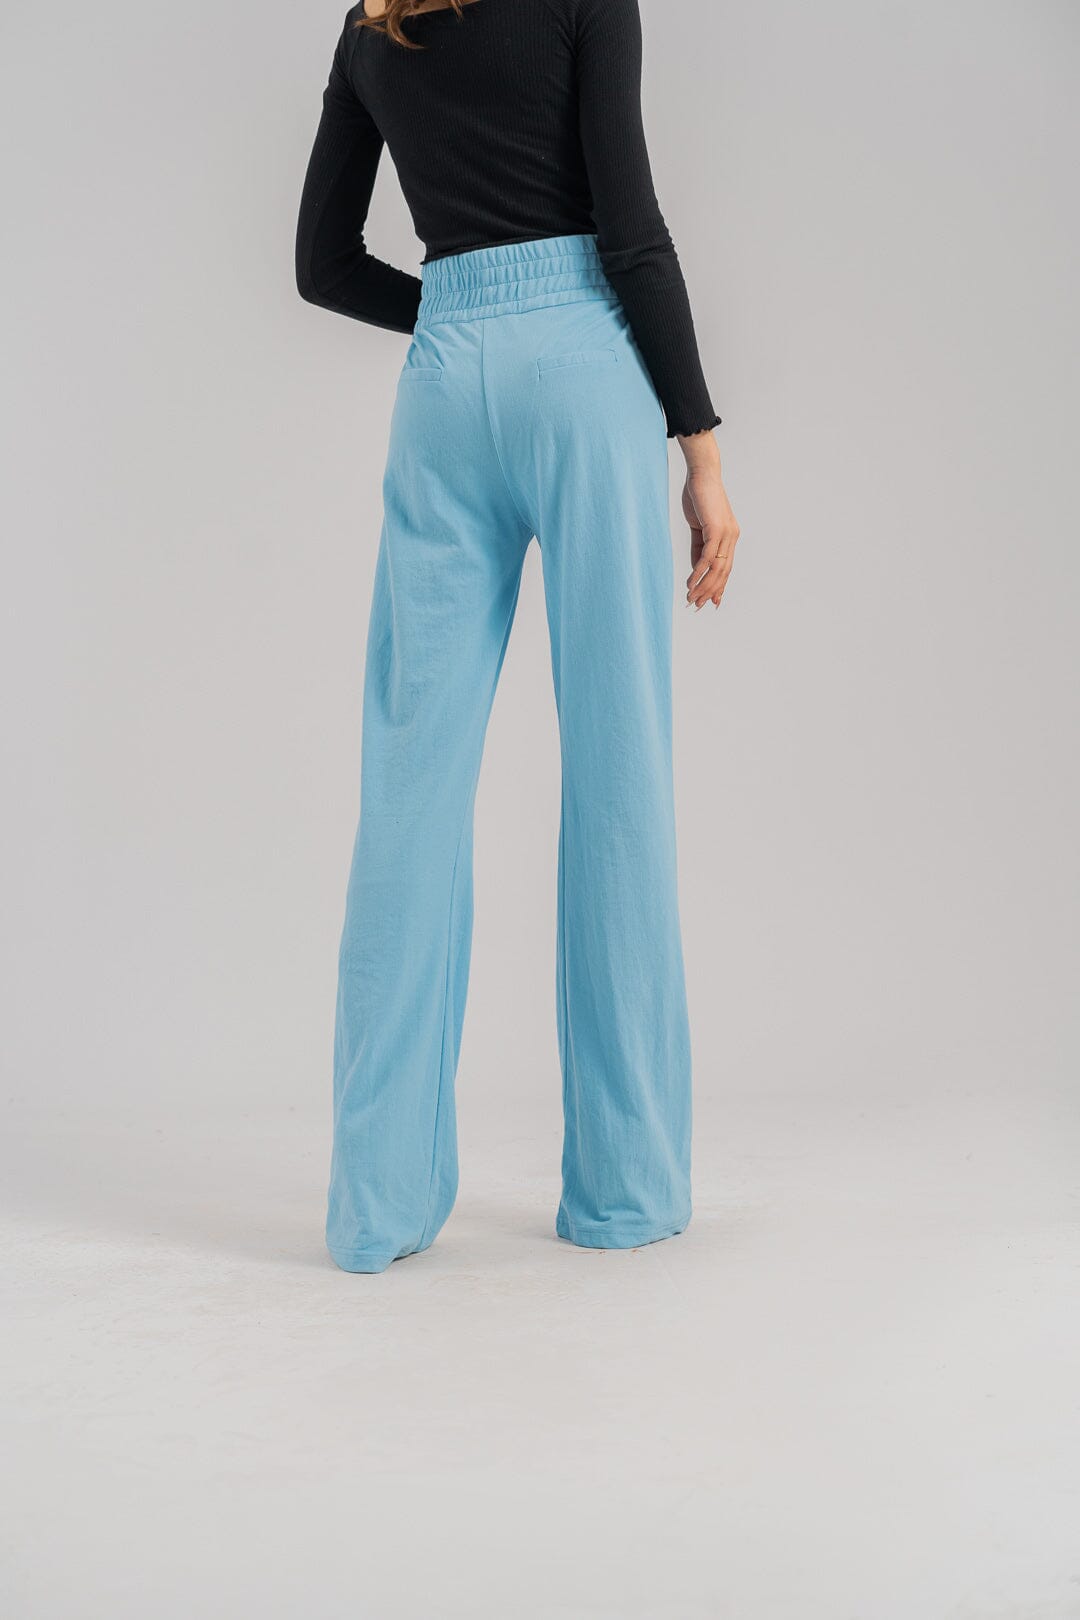 East West Women's Pique Flared Trousers Women's Trousers East West 